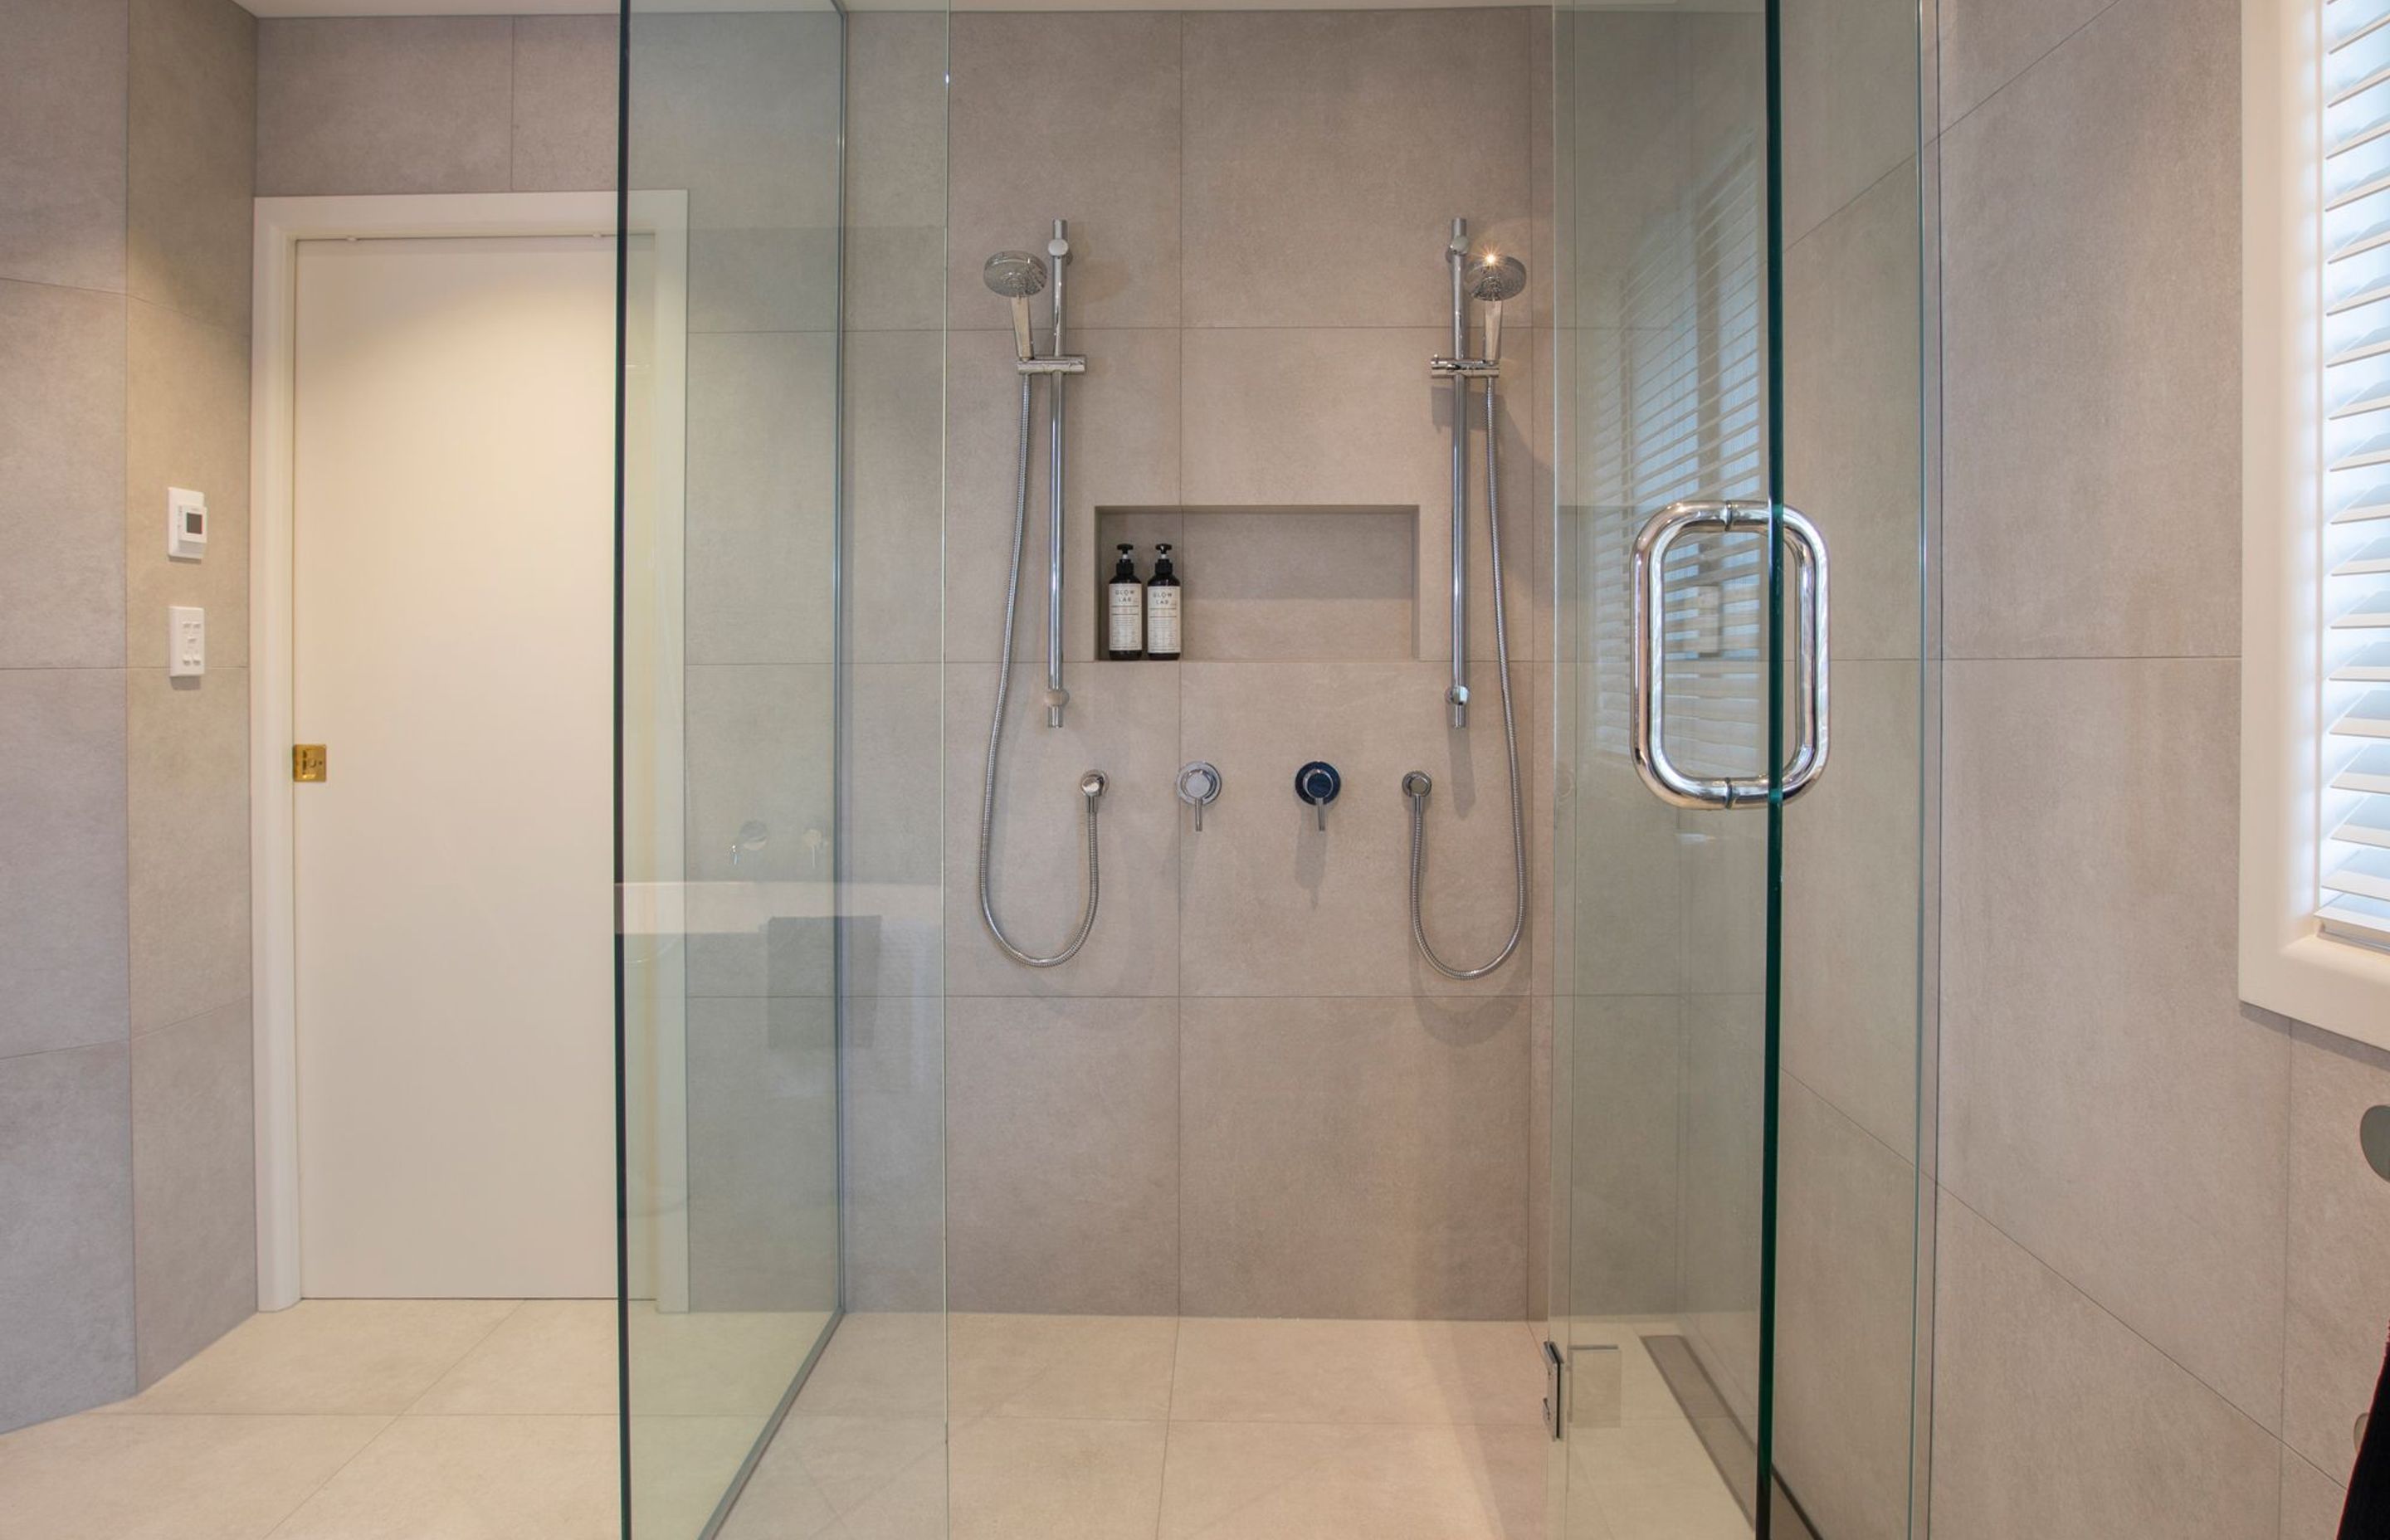 Large custom shower for maximum useability and practicality with the addition of a tiled recess shelf.